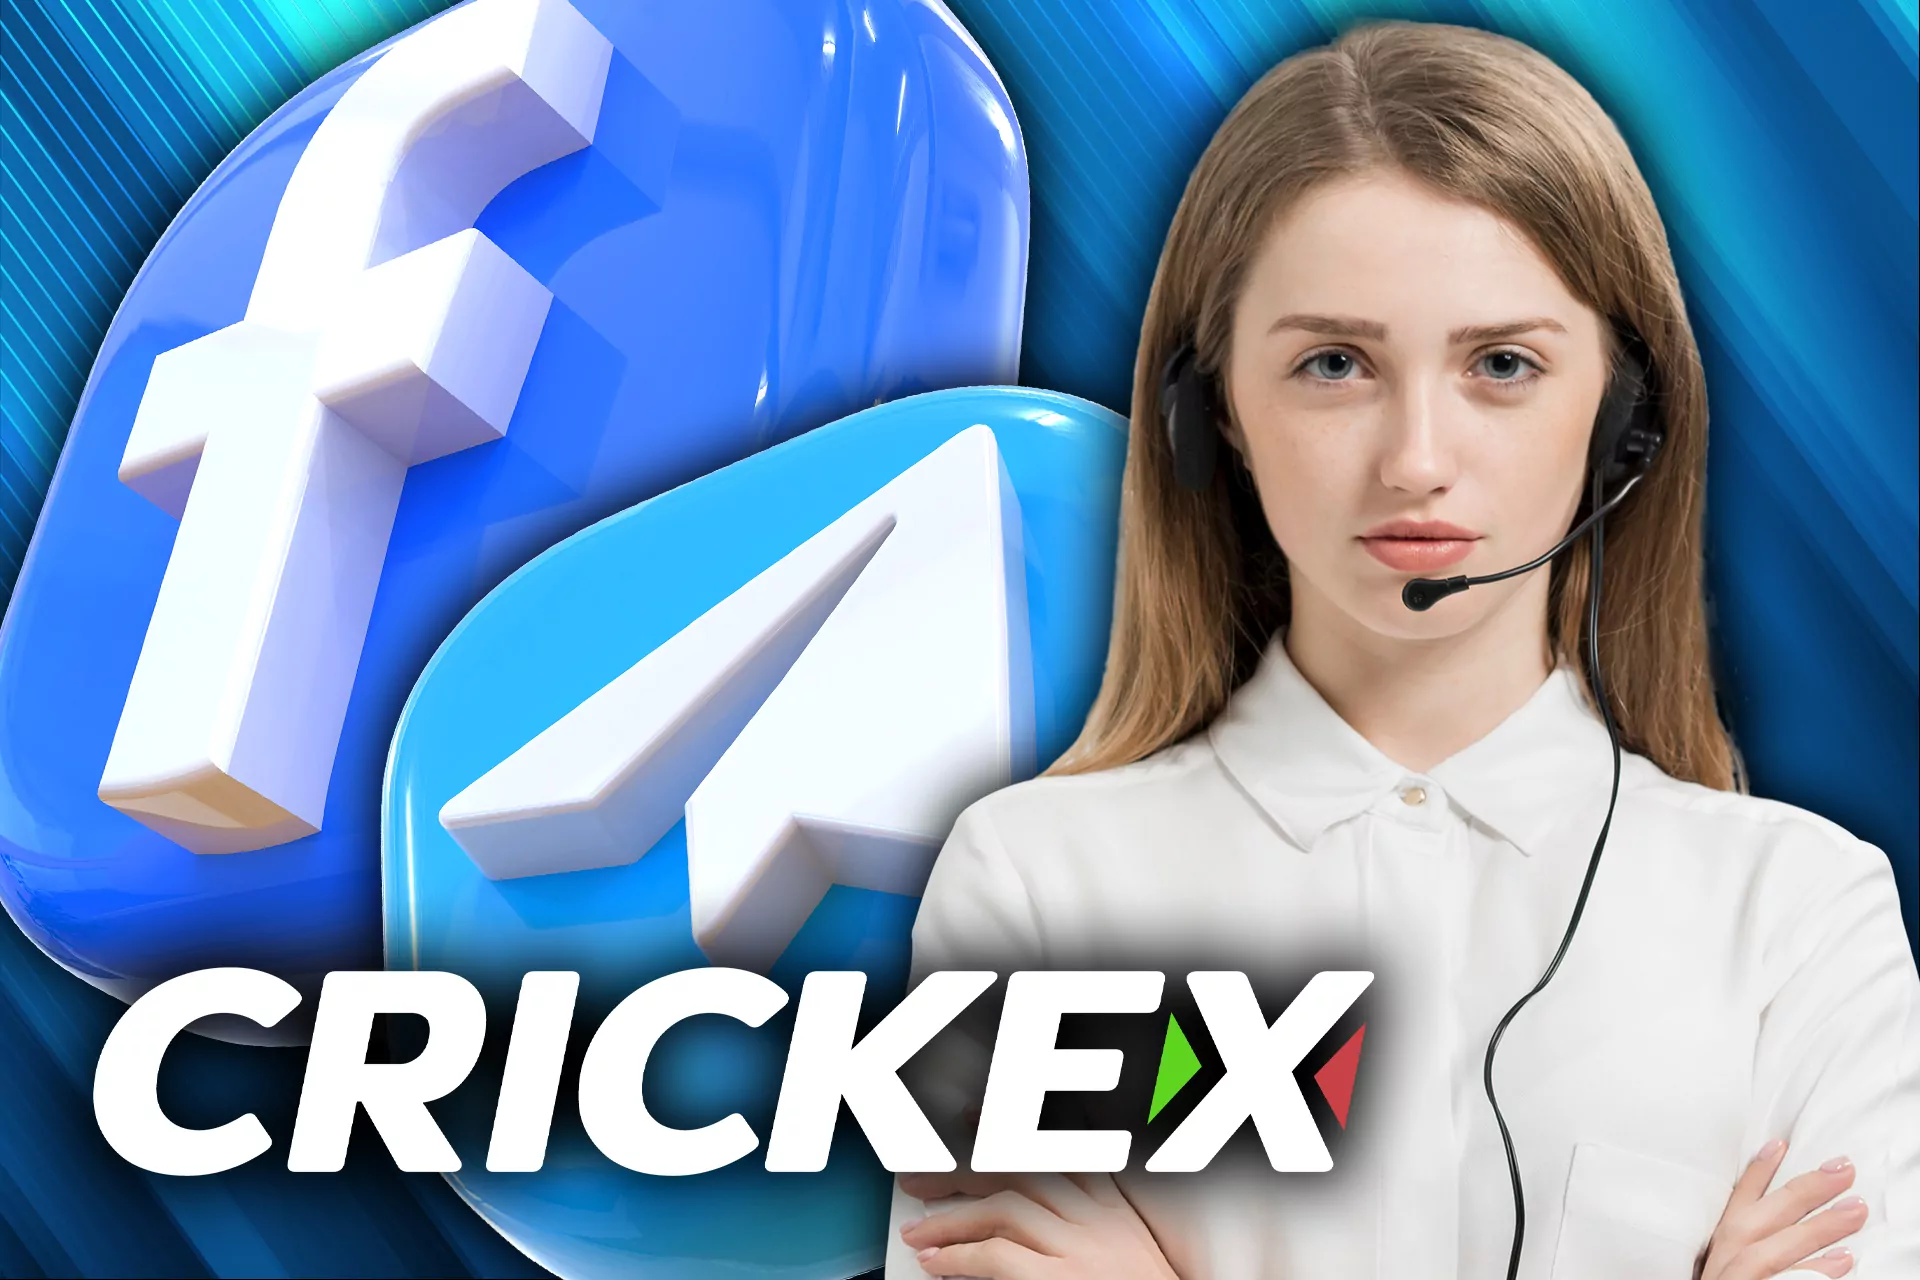 There are several ways to contact the Crickex team.